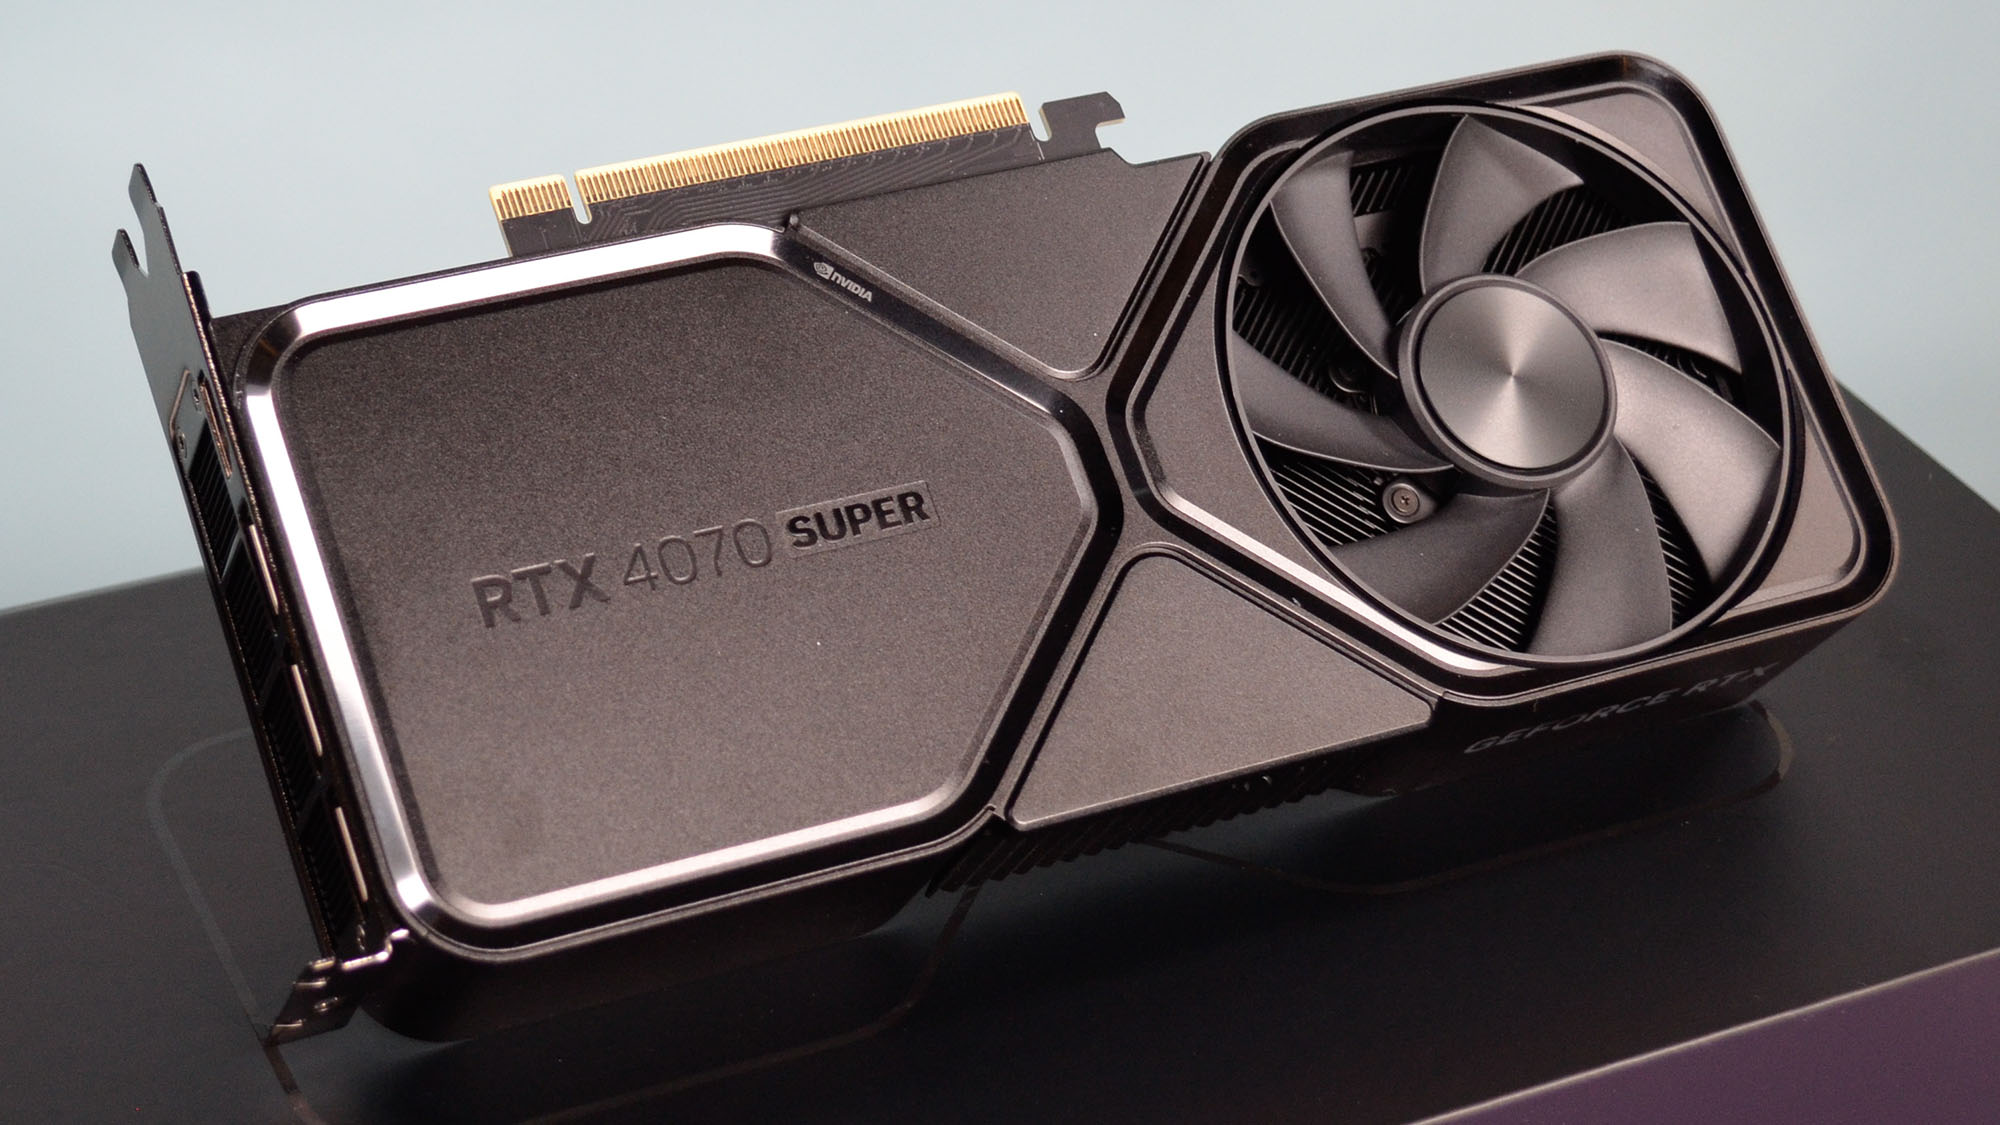 NVIDIA RTX 4070 review: The new 1440p gaming leader